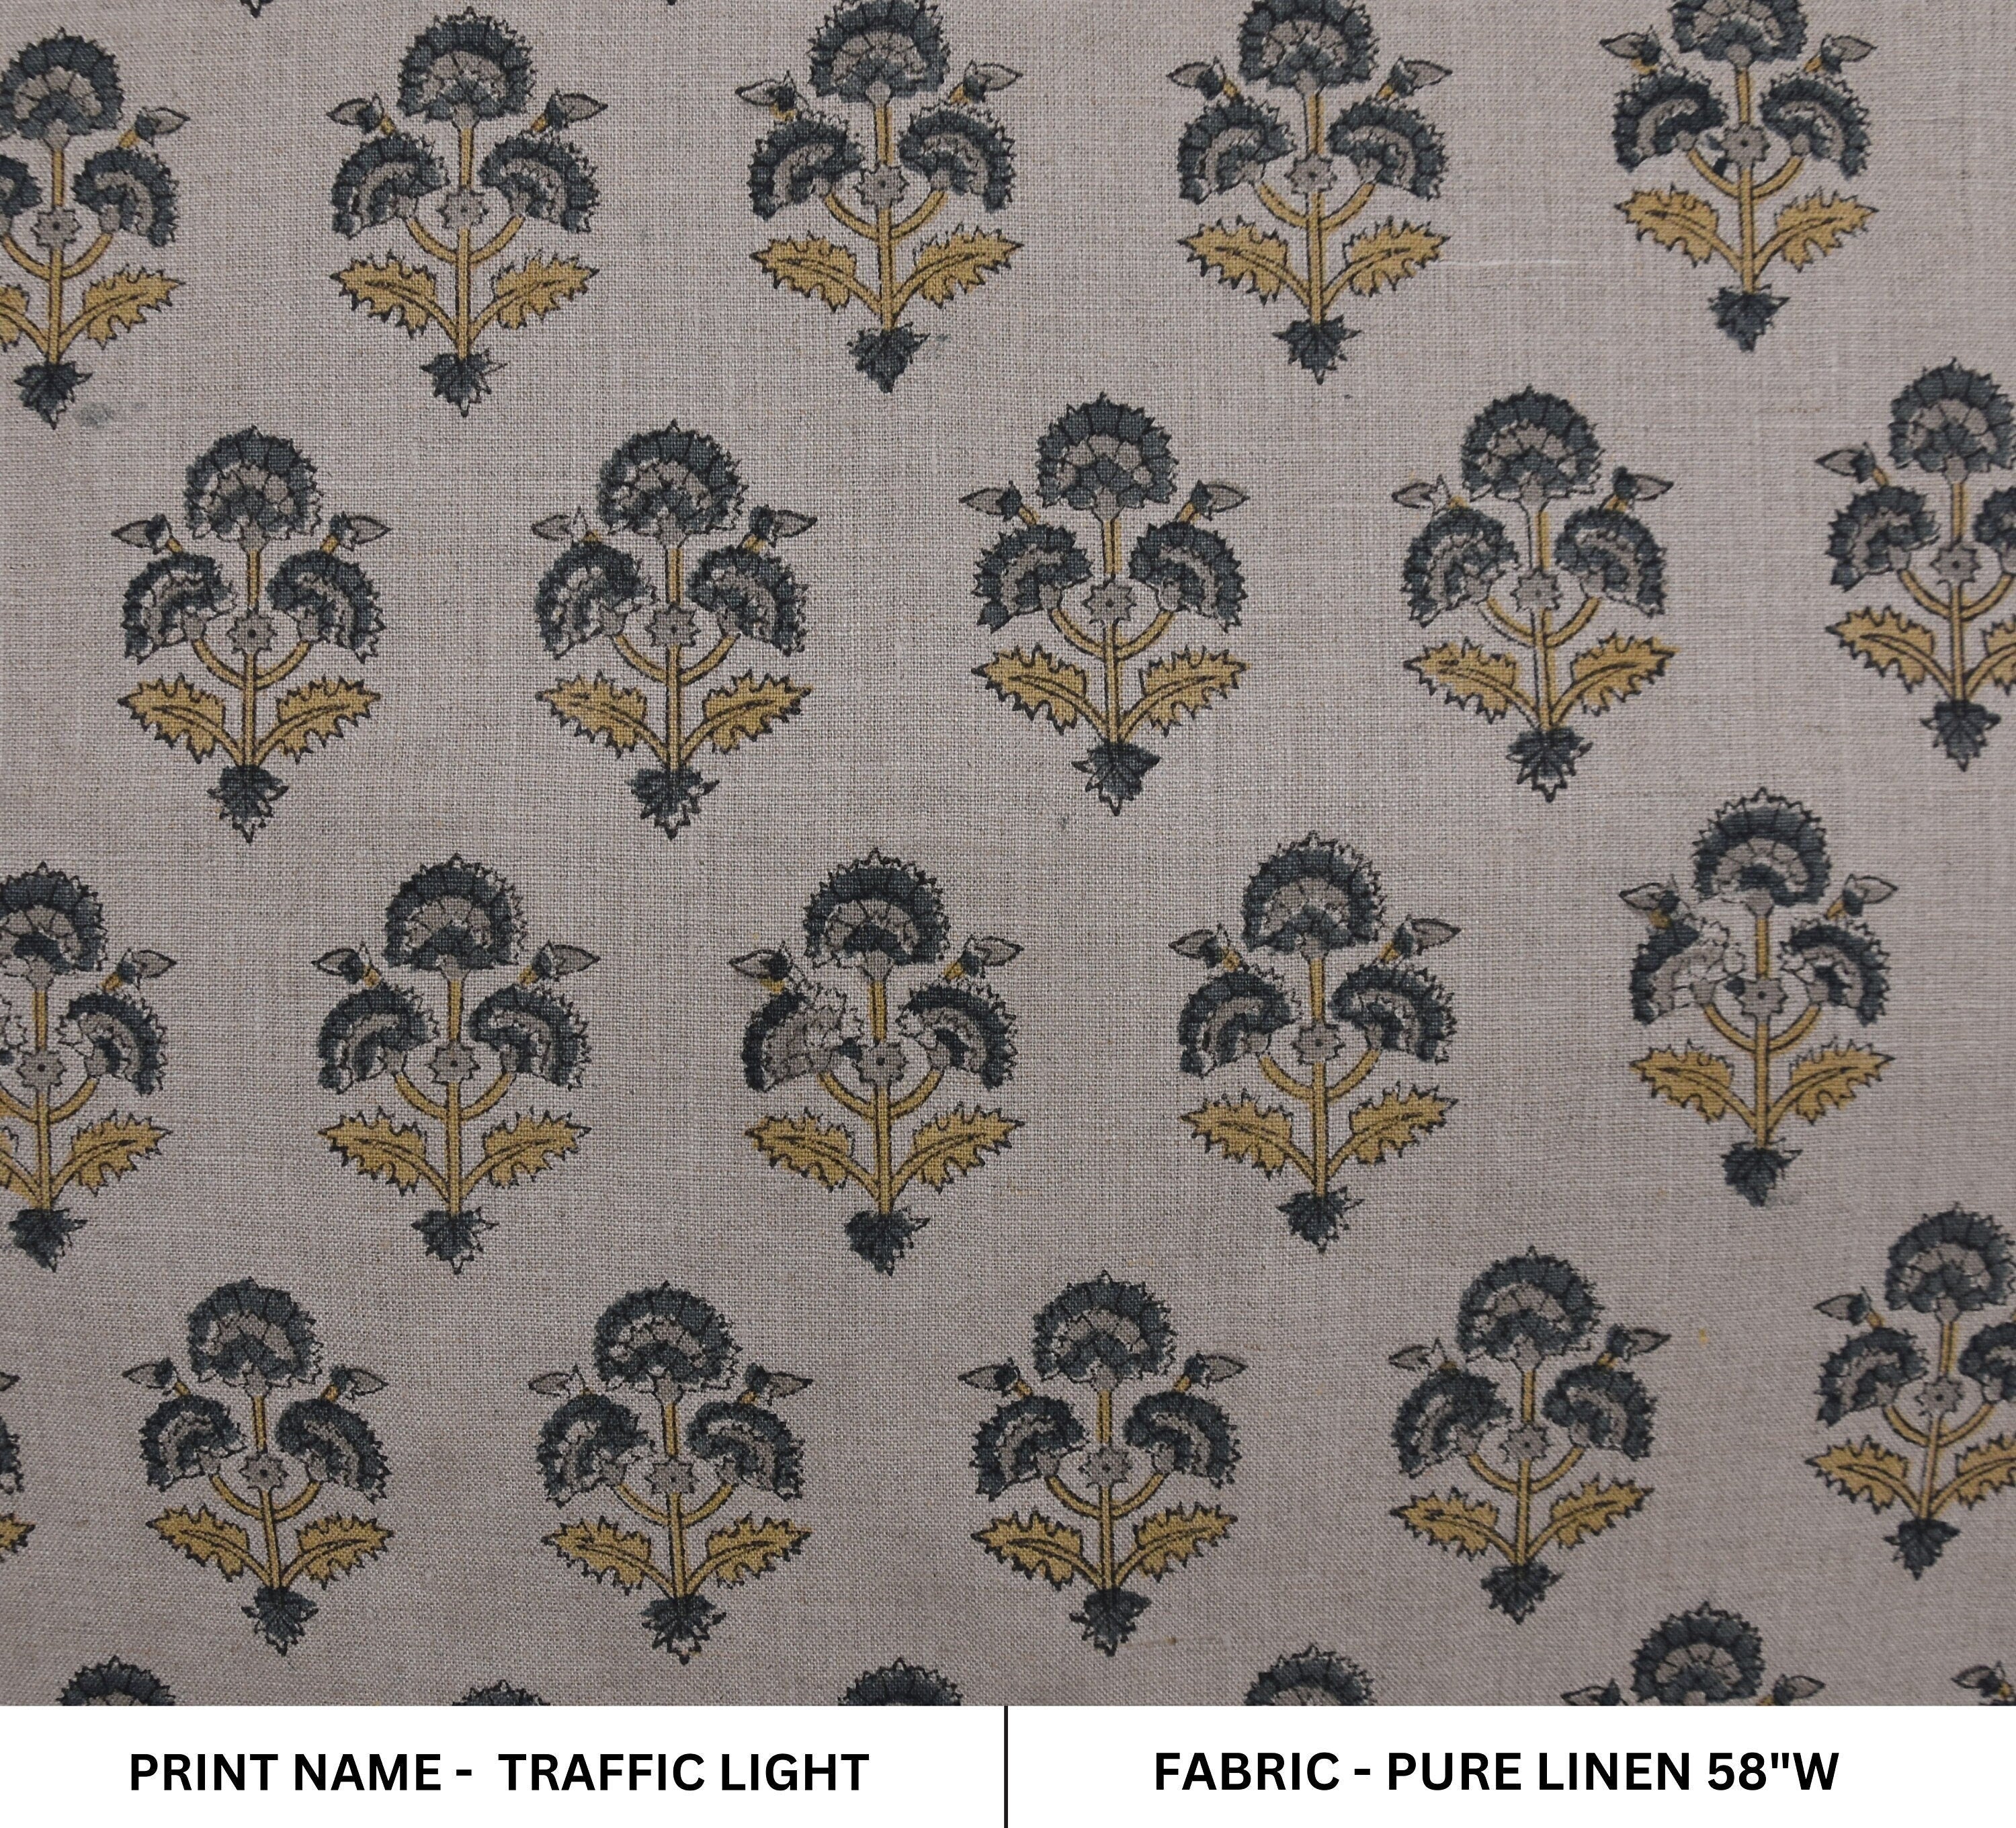 Pure linen 58" wide window curtains, heavy linen fabric, table cover, lampshades, decorative cushions - TRAFFIC LIGHT